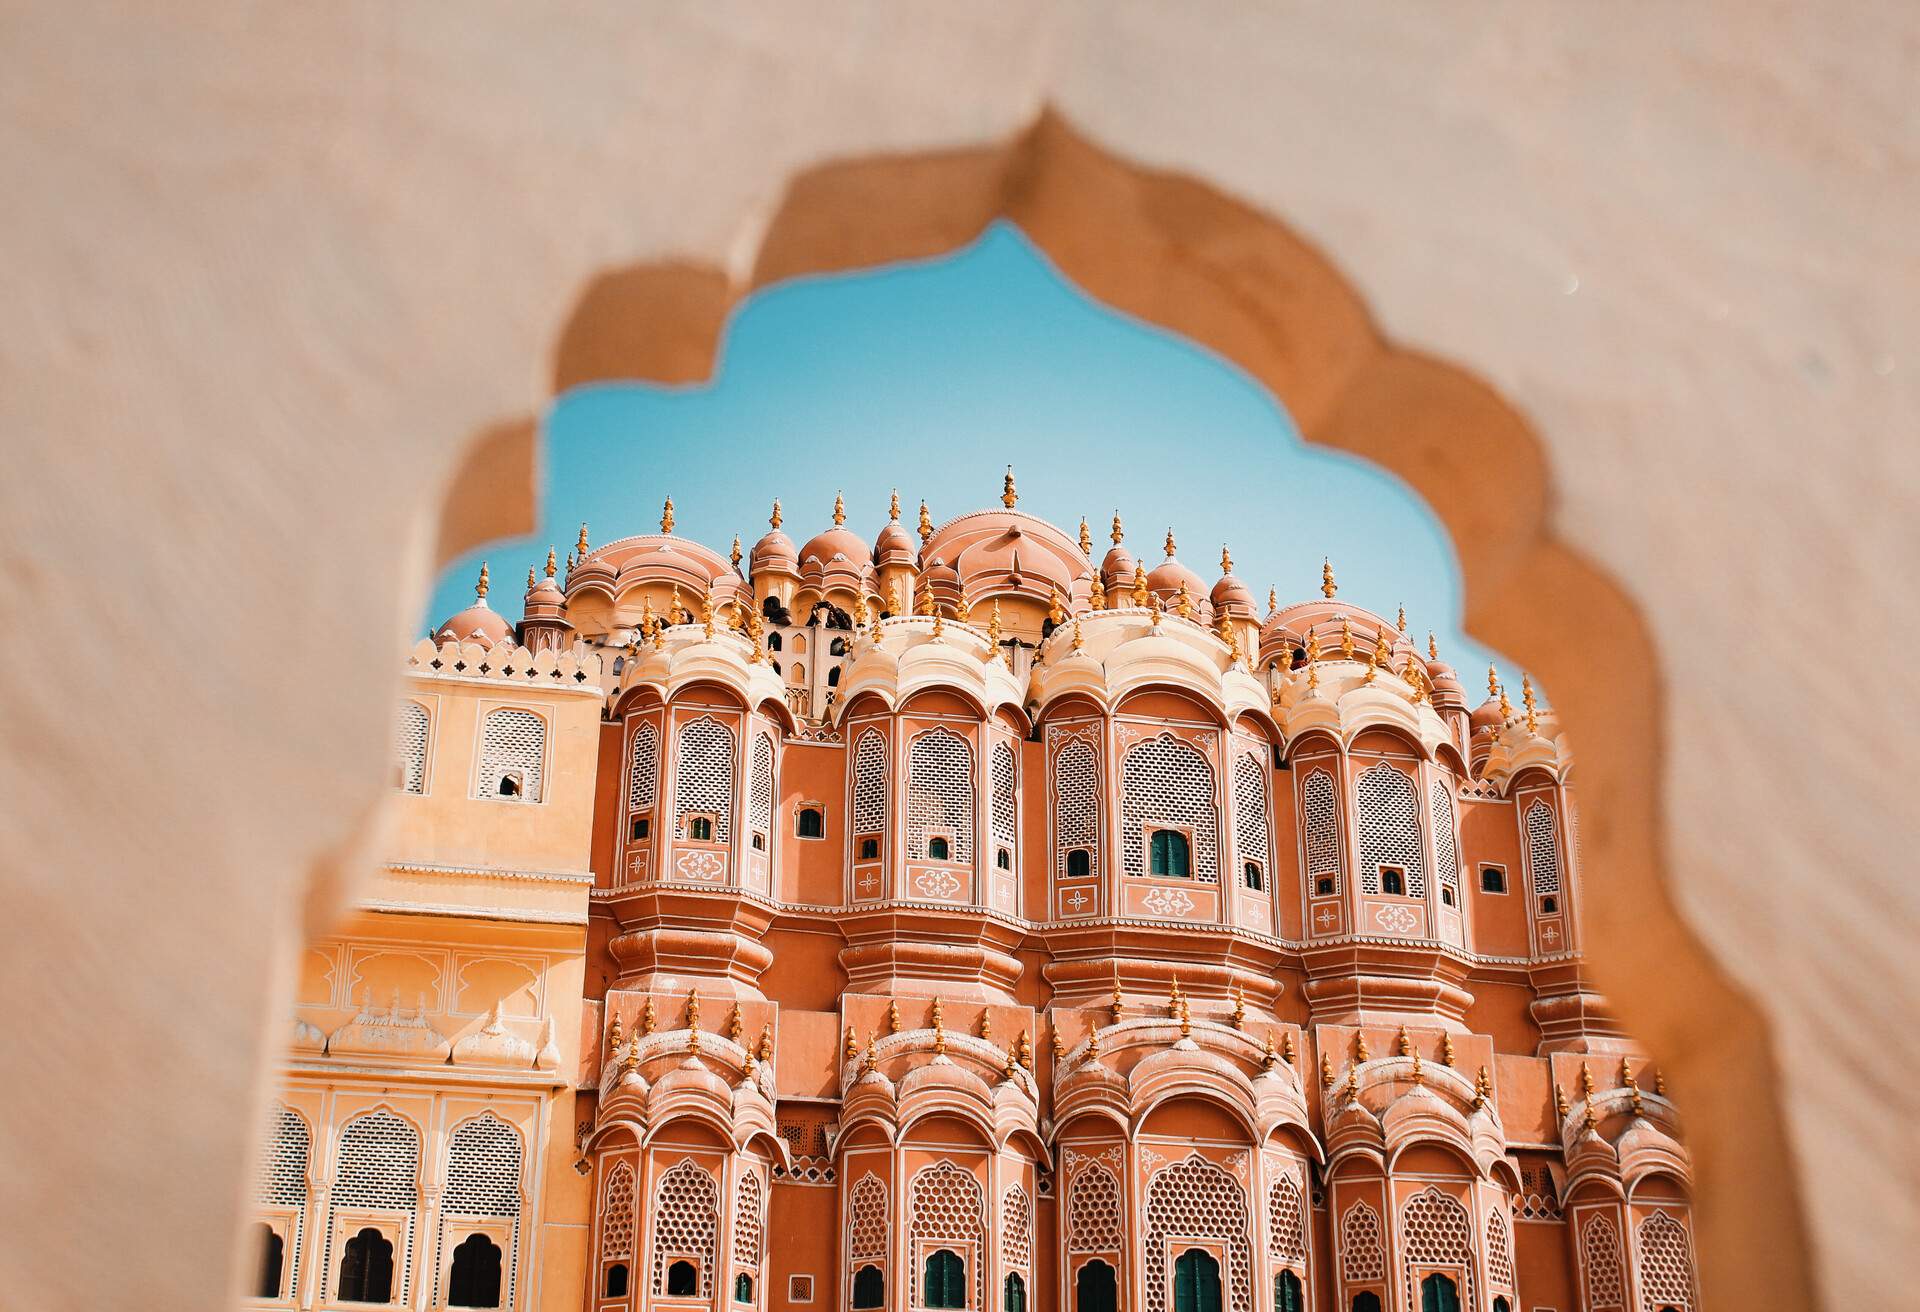 DEST_INDIA_JAIPUR_Hawa Mahal_GettyImages-1127479843